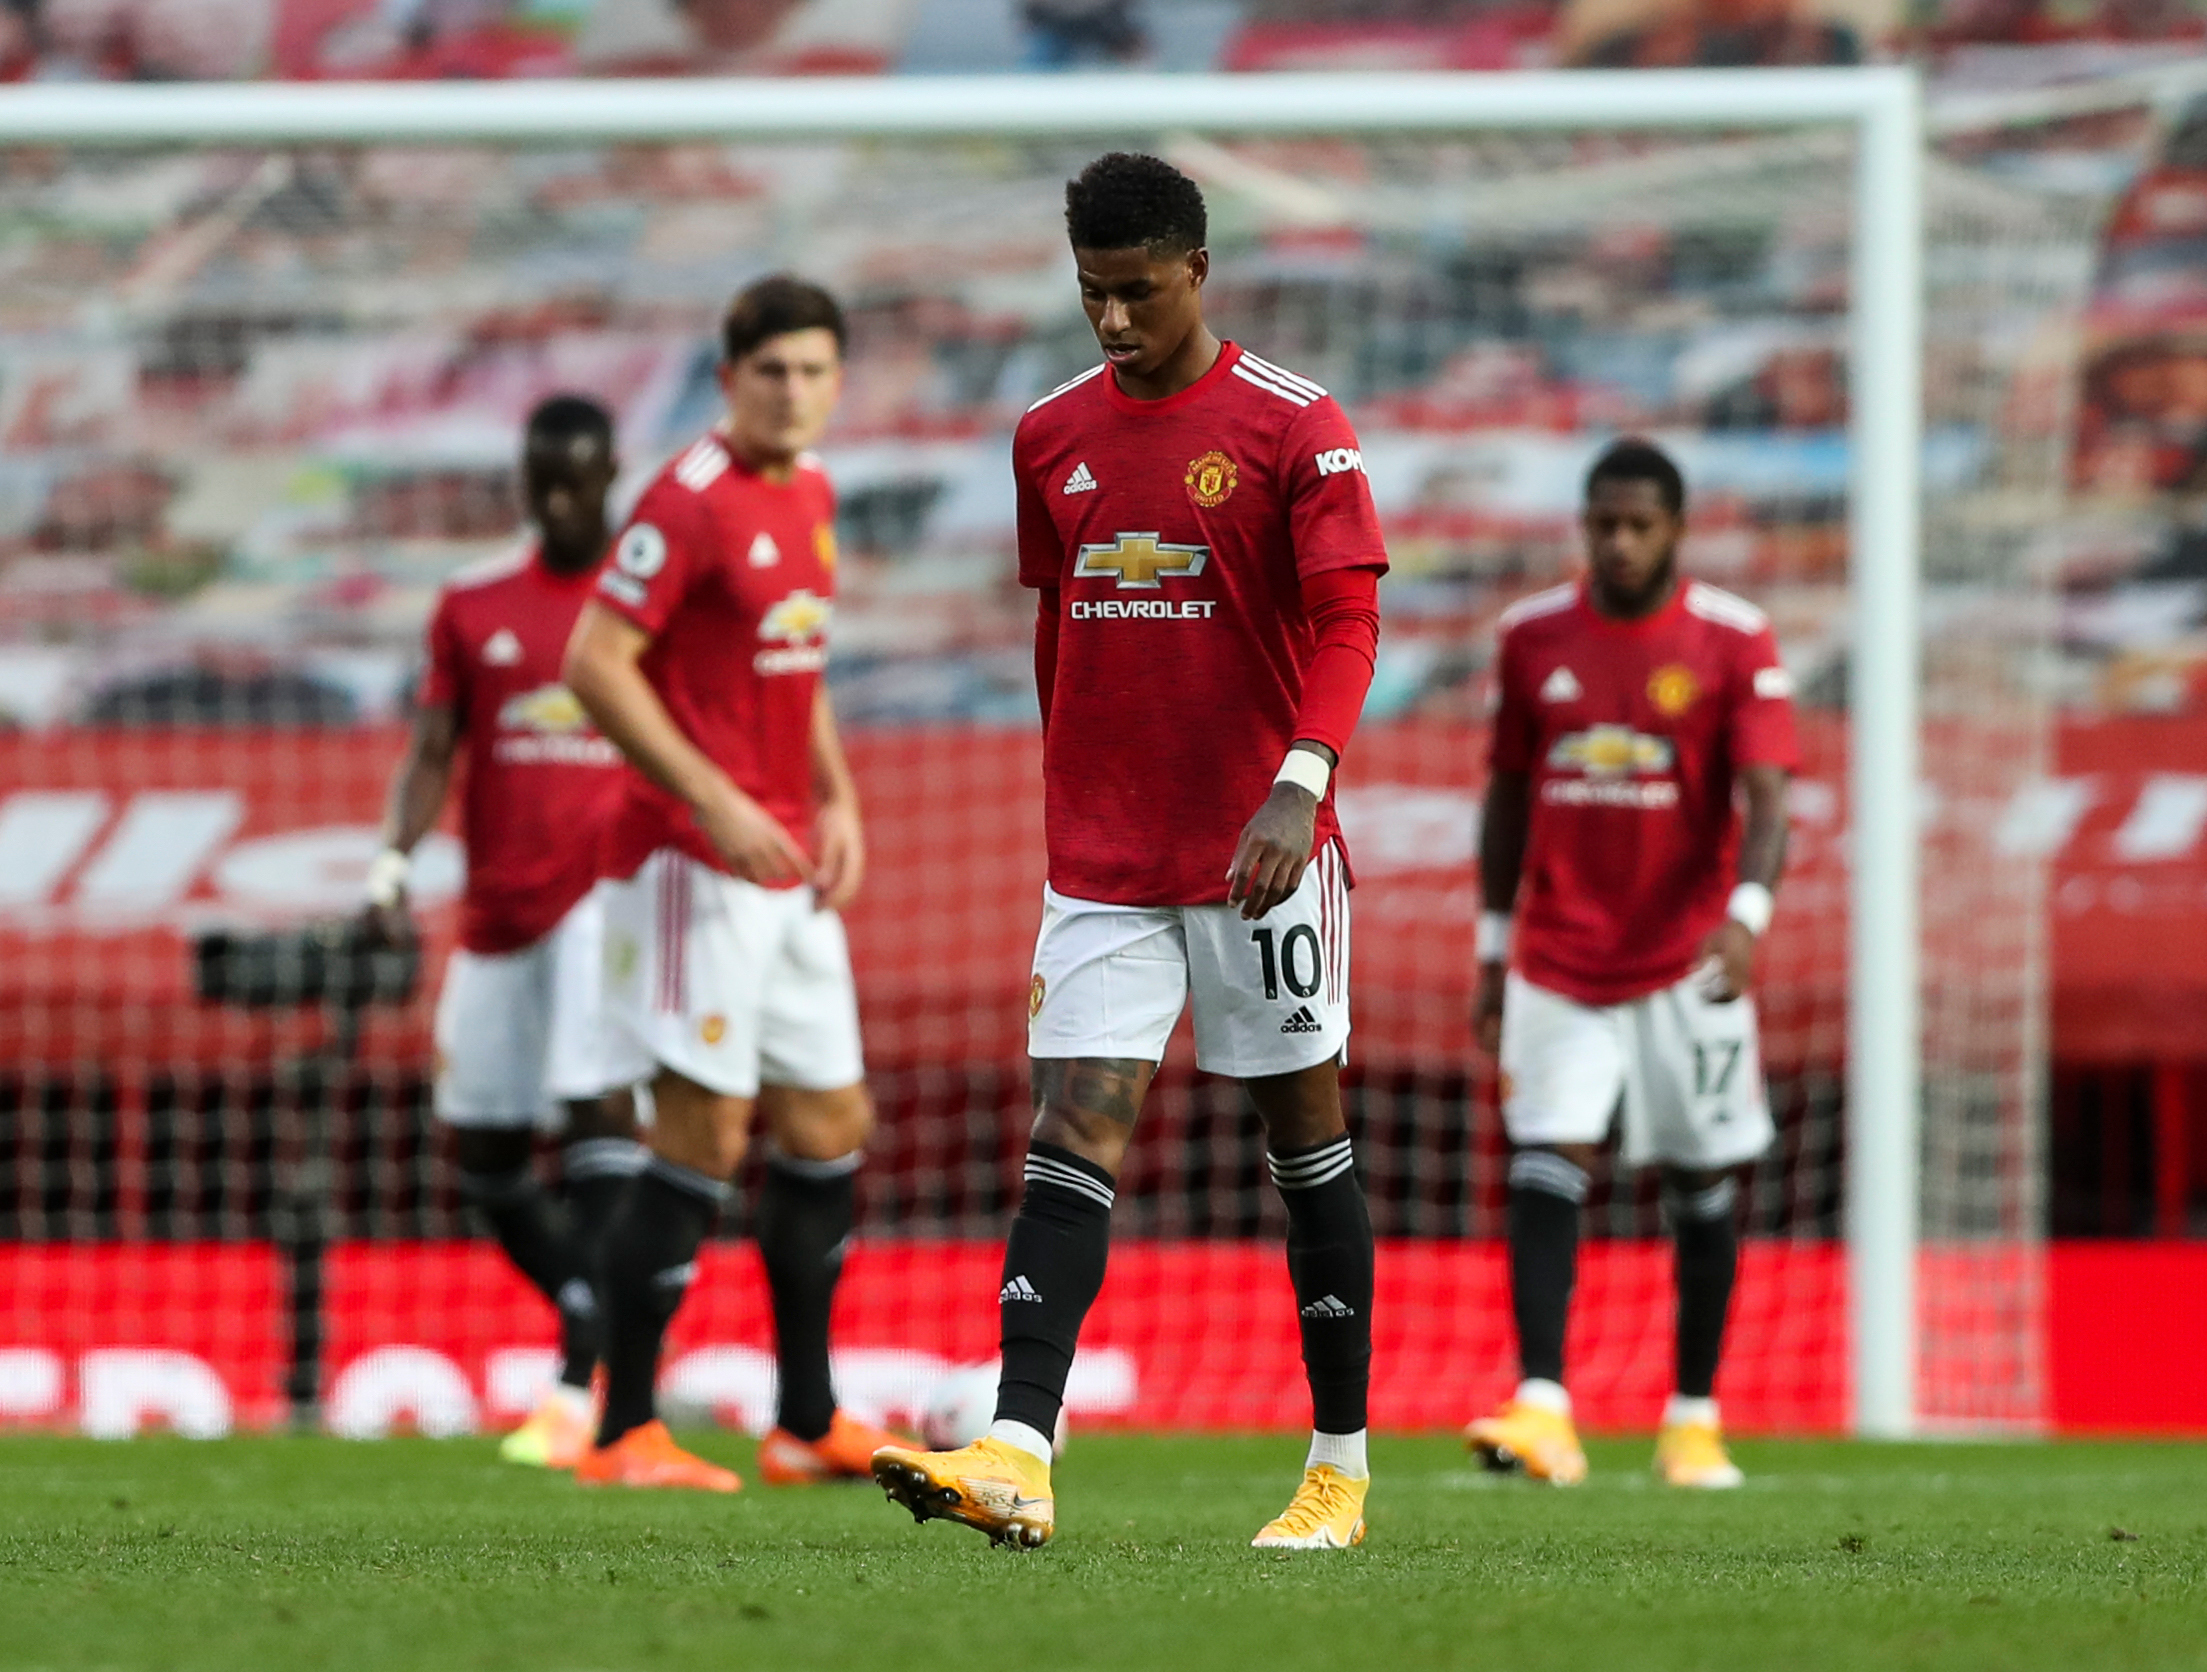 They will cost Ole his job: Roy Keane lambasts Man Utd players for 6-1 humiliation against Spurs - THE SPORTS ROOM